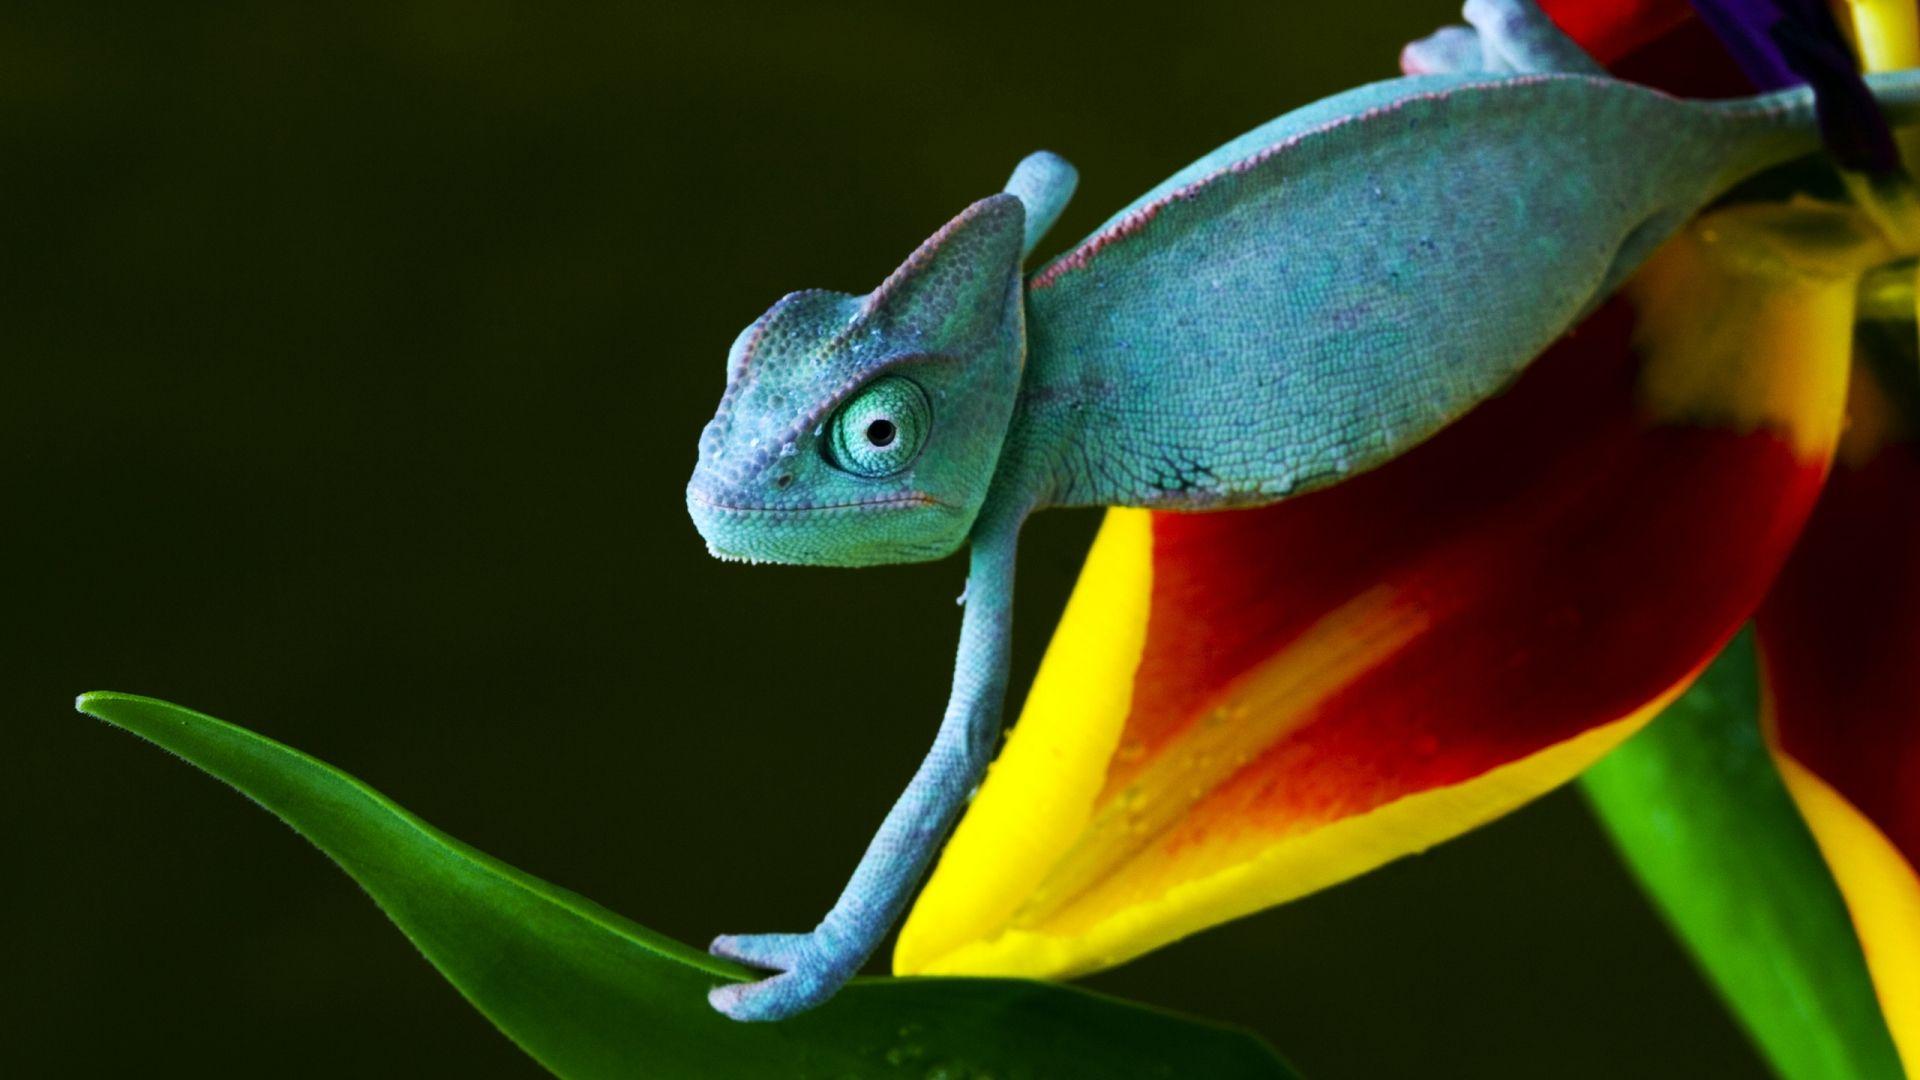 Reptiles Wallpaper, High Quality Reptiles Background